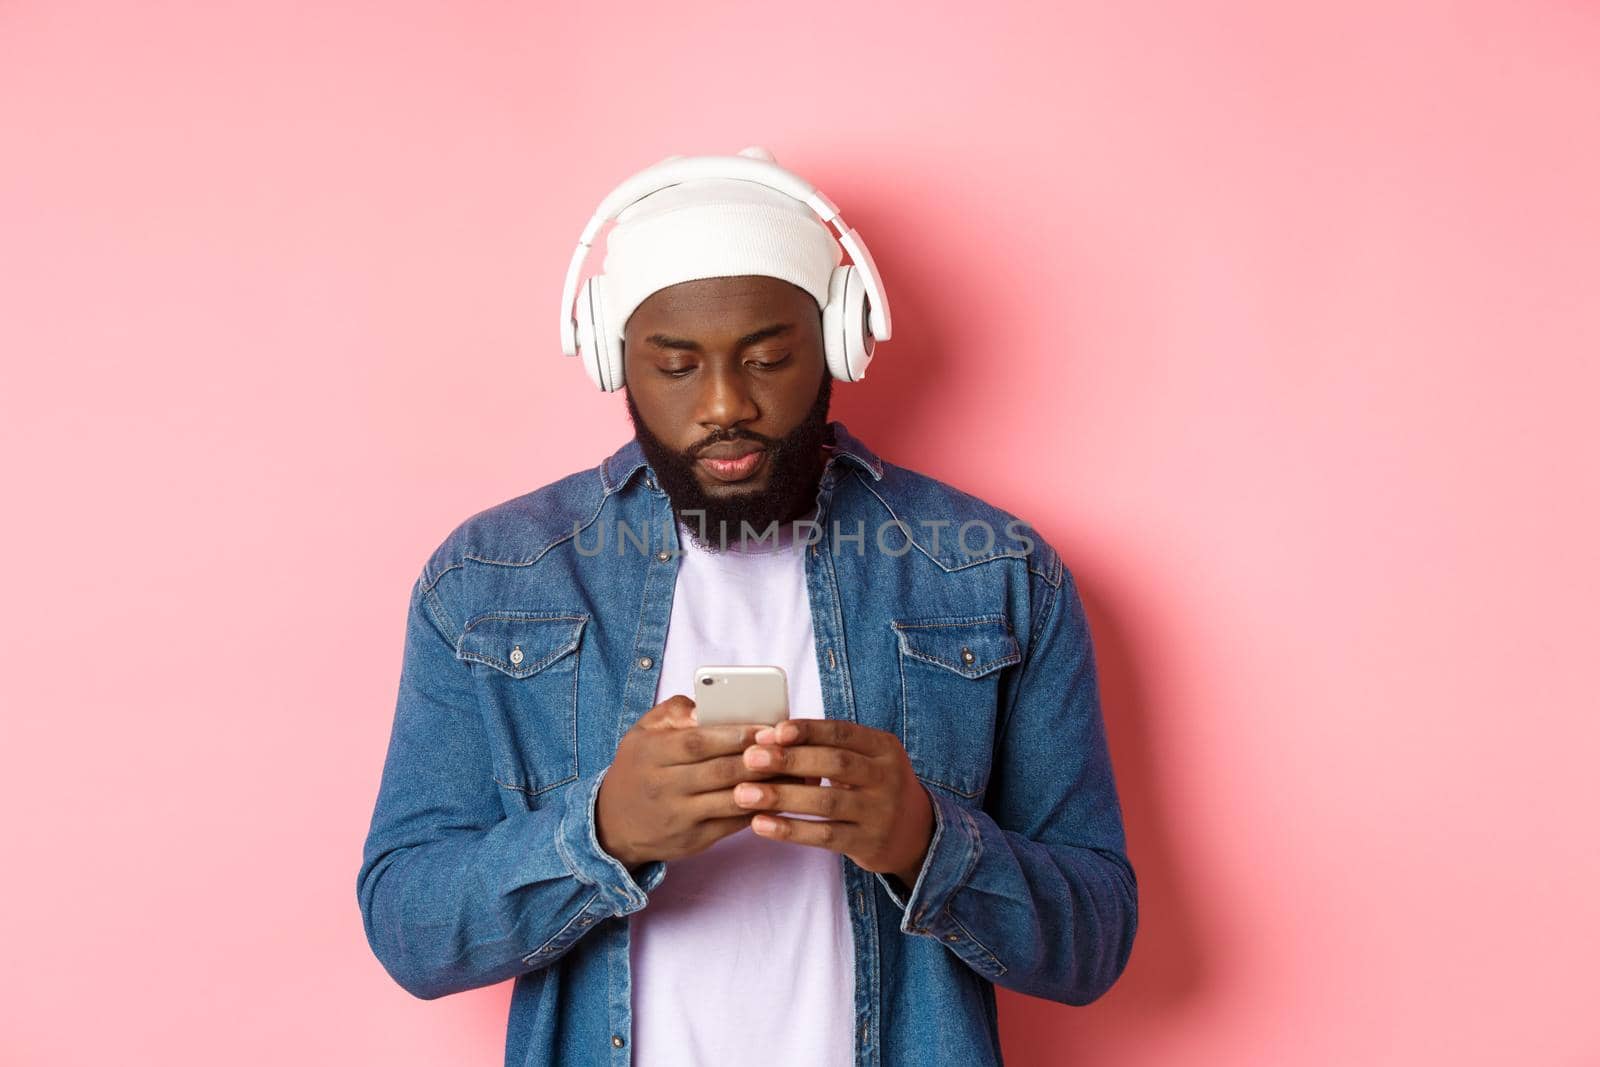 Man looking serious while reading messagin on phone, listening music in headphones, standing over pink background.